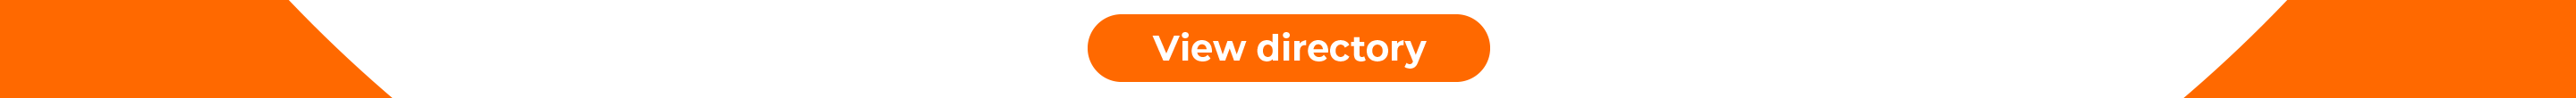 View directory